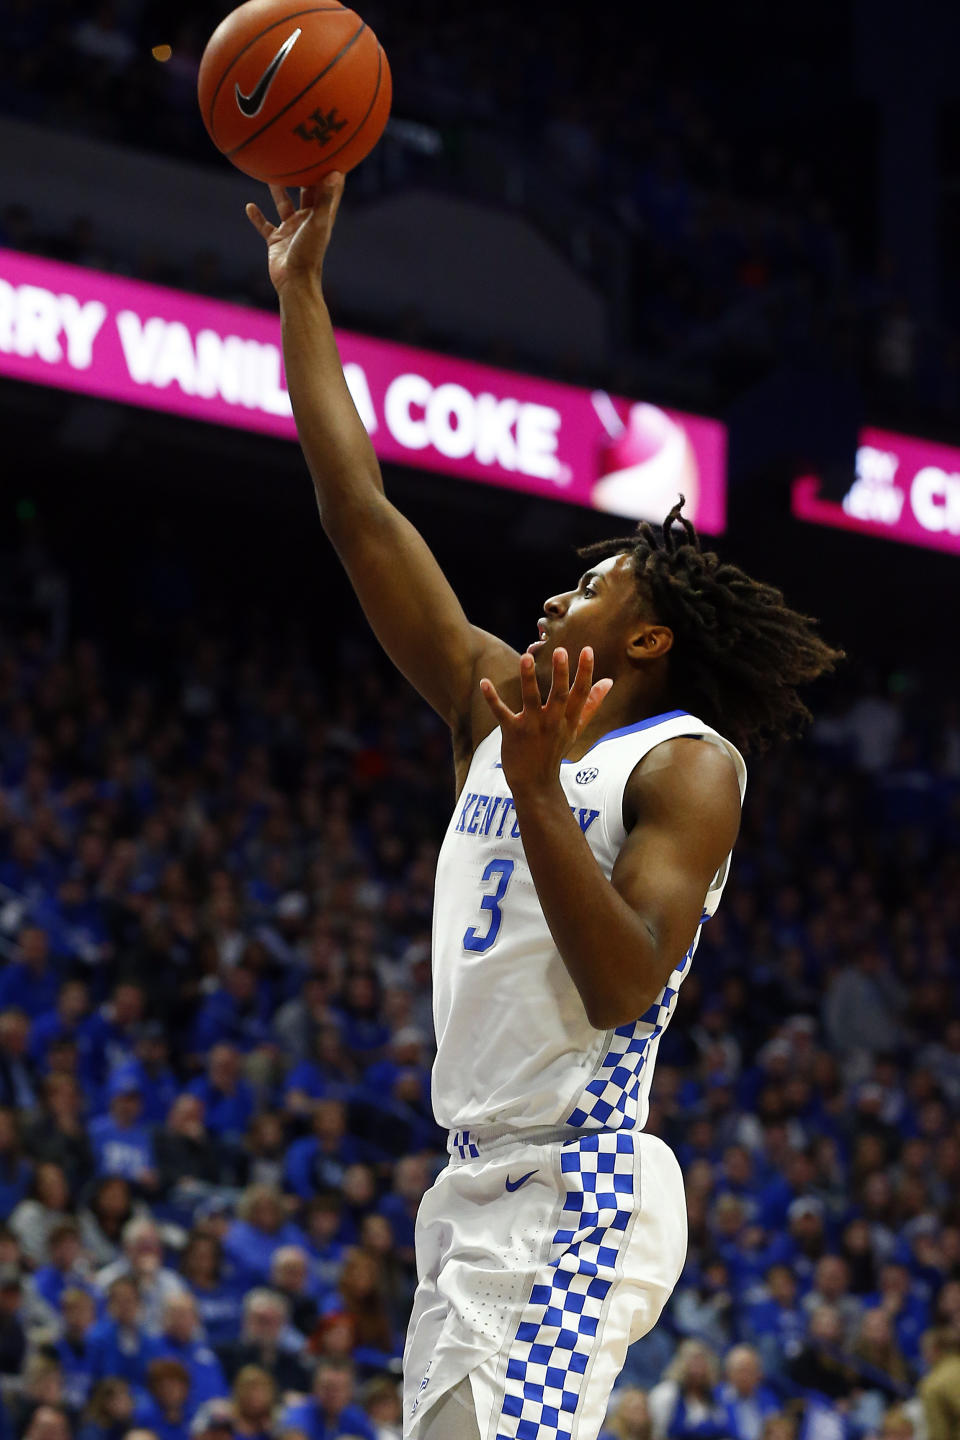 Kentucky's Tyrese Maxey takes an uncontested shot in the first half of an NCAA college basketball game against Florida in Lexington, Ky., Saturday, Feb. 22, 2020. (AP Photo/James Crisp)